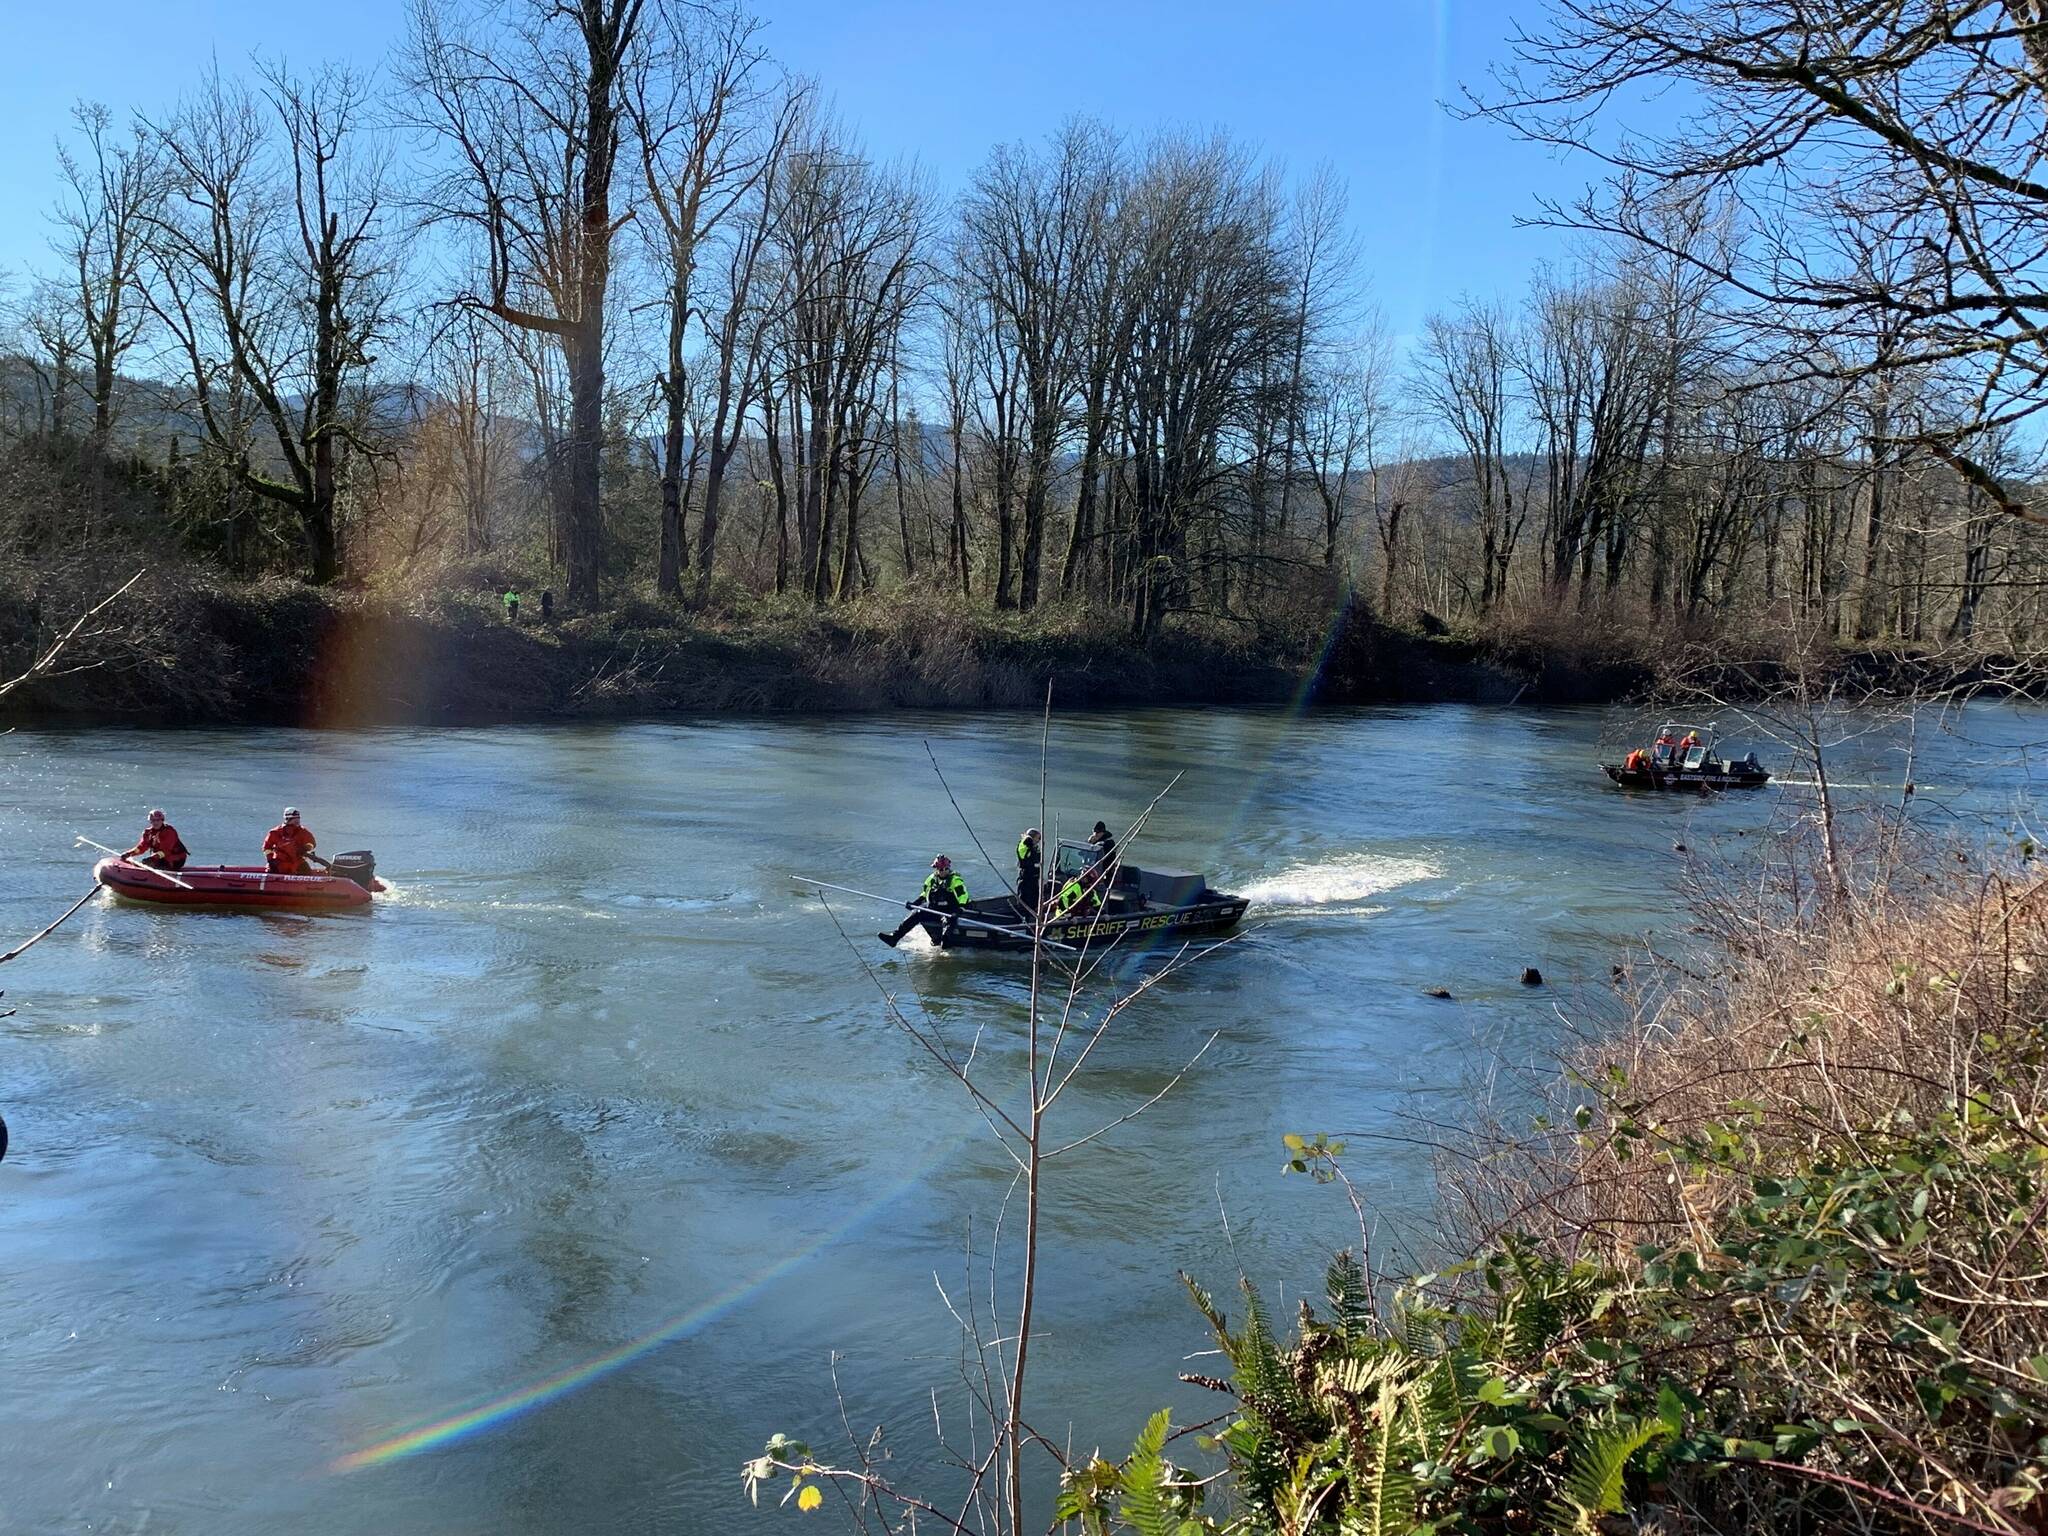 Search and Rescue Crews look for car crash victims along Snoqualmie River near Fall City. Courtesy of Washington State Patrol.